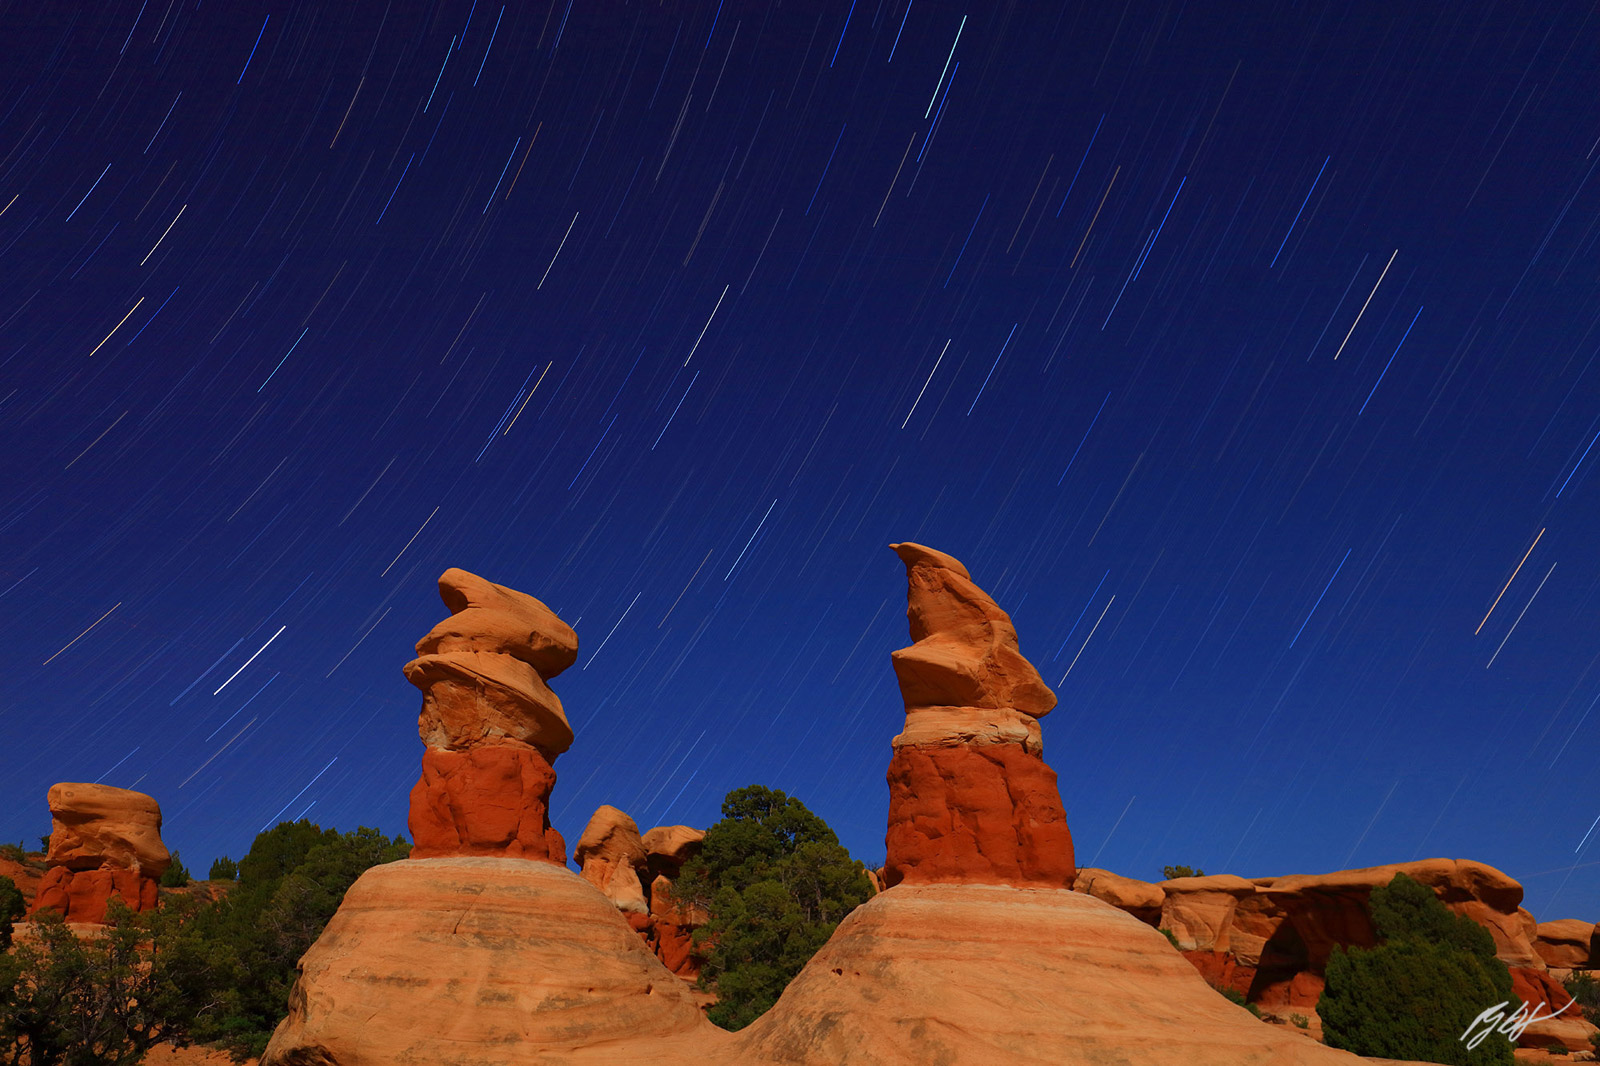 Star Trails and Rock Formations from Devils Garden in Escalante Grand Staircase National Monument, Utah